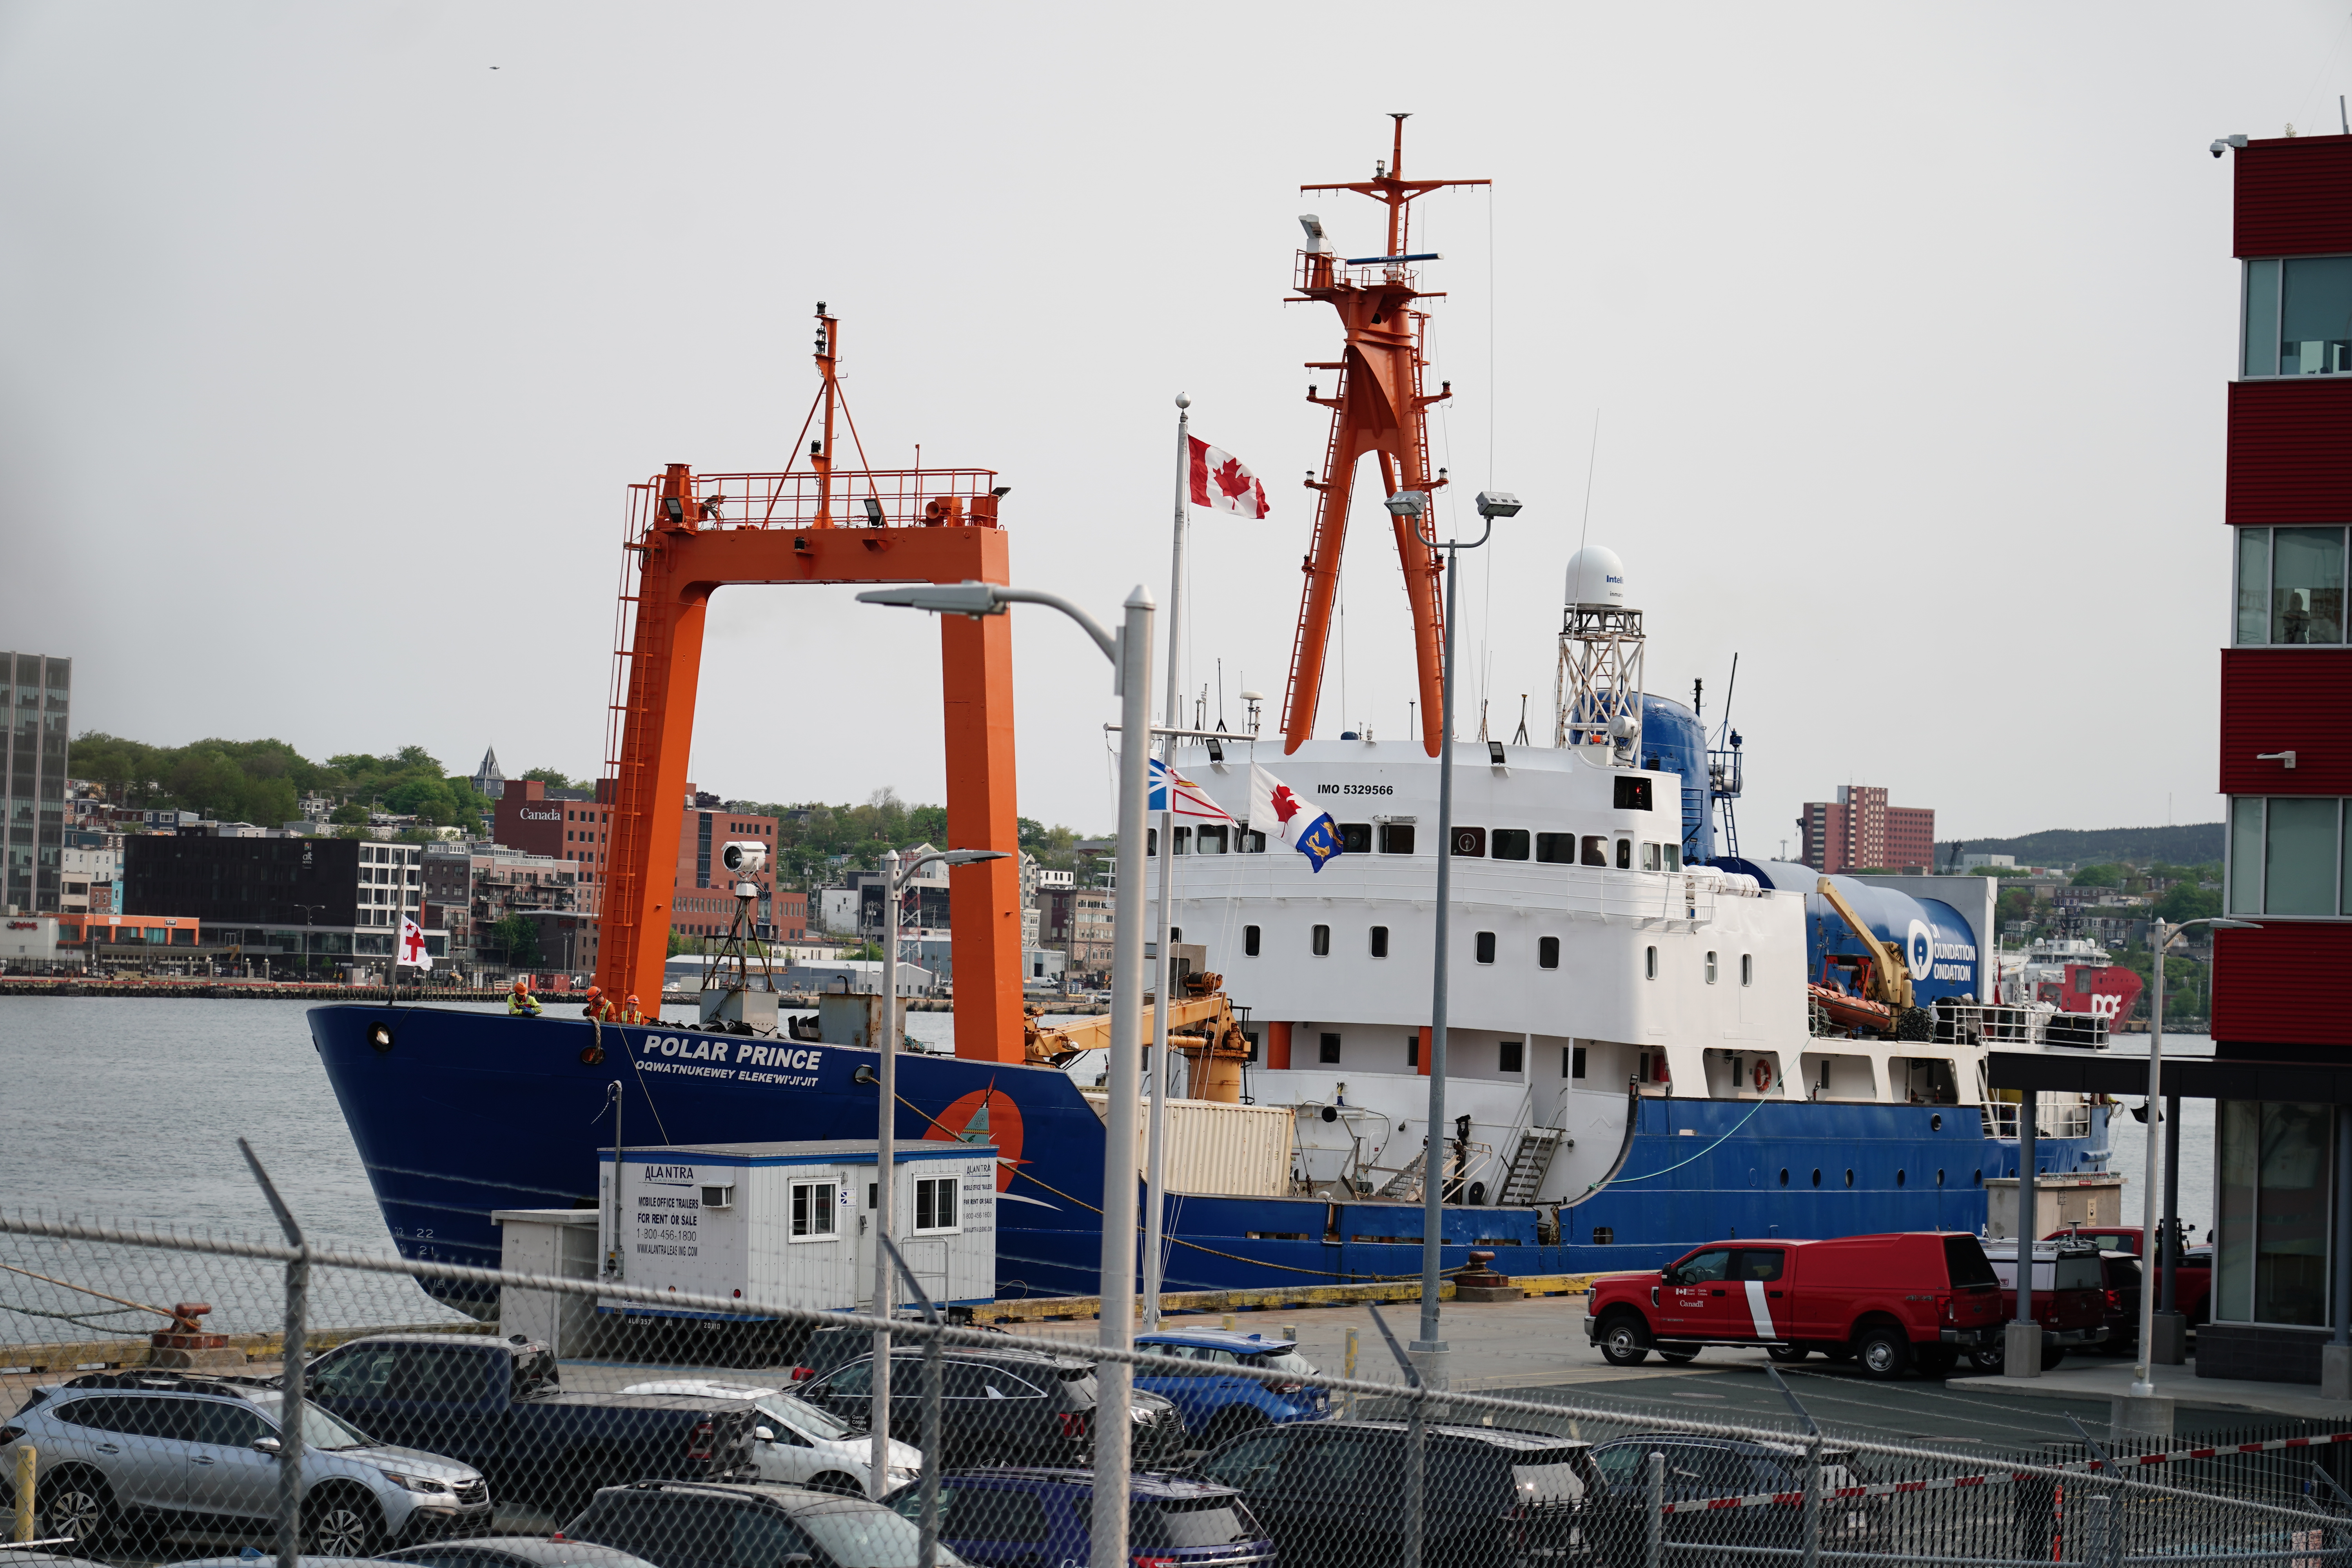 The Polar Prince, the main support ship for the Titan submersible, arrives at the Port of St. John's in Newfoundland, Canada, on June 24, 2023 | Source: Getty Images